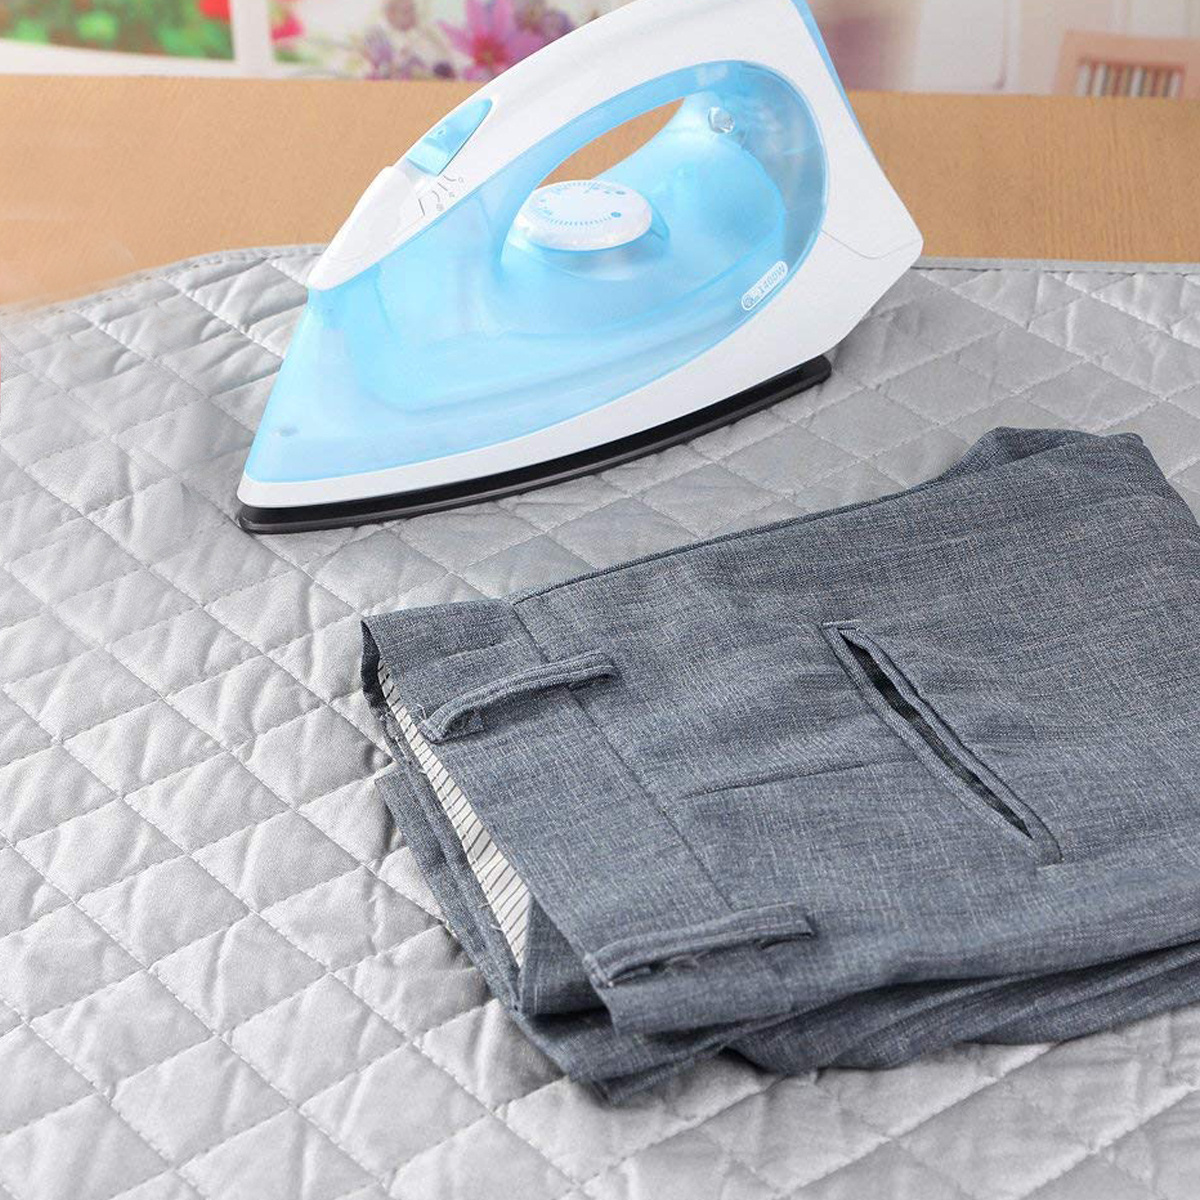 Portable Foldable Ironing Pad Mat Blanket for Table Travel Ironing